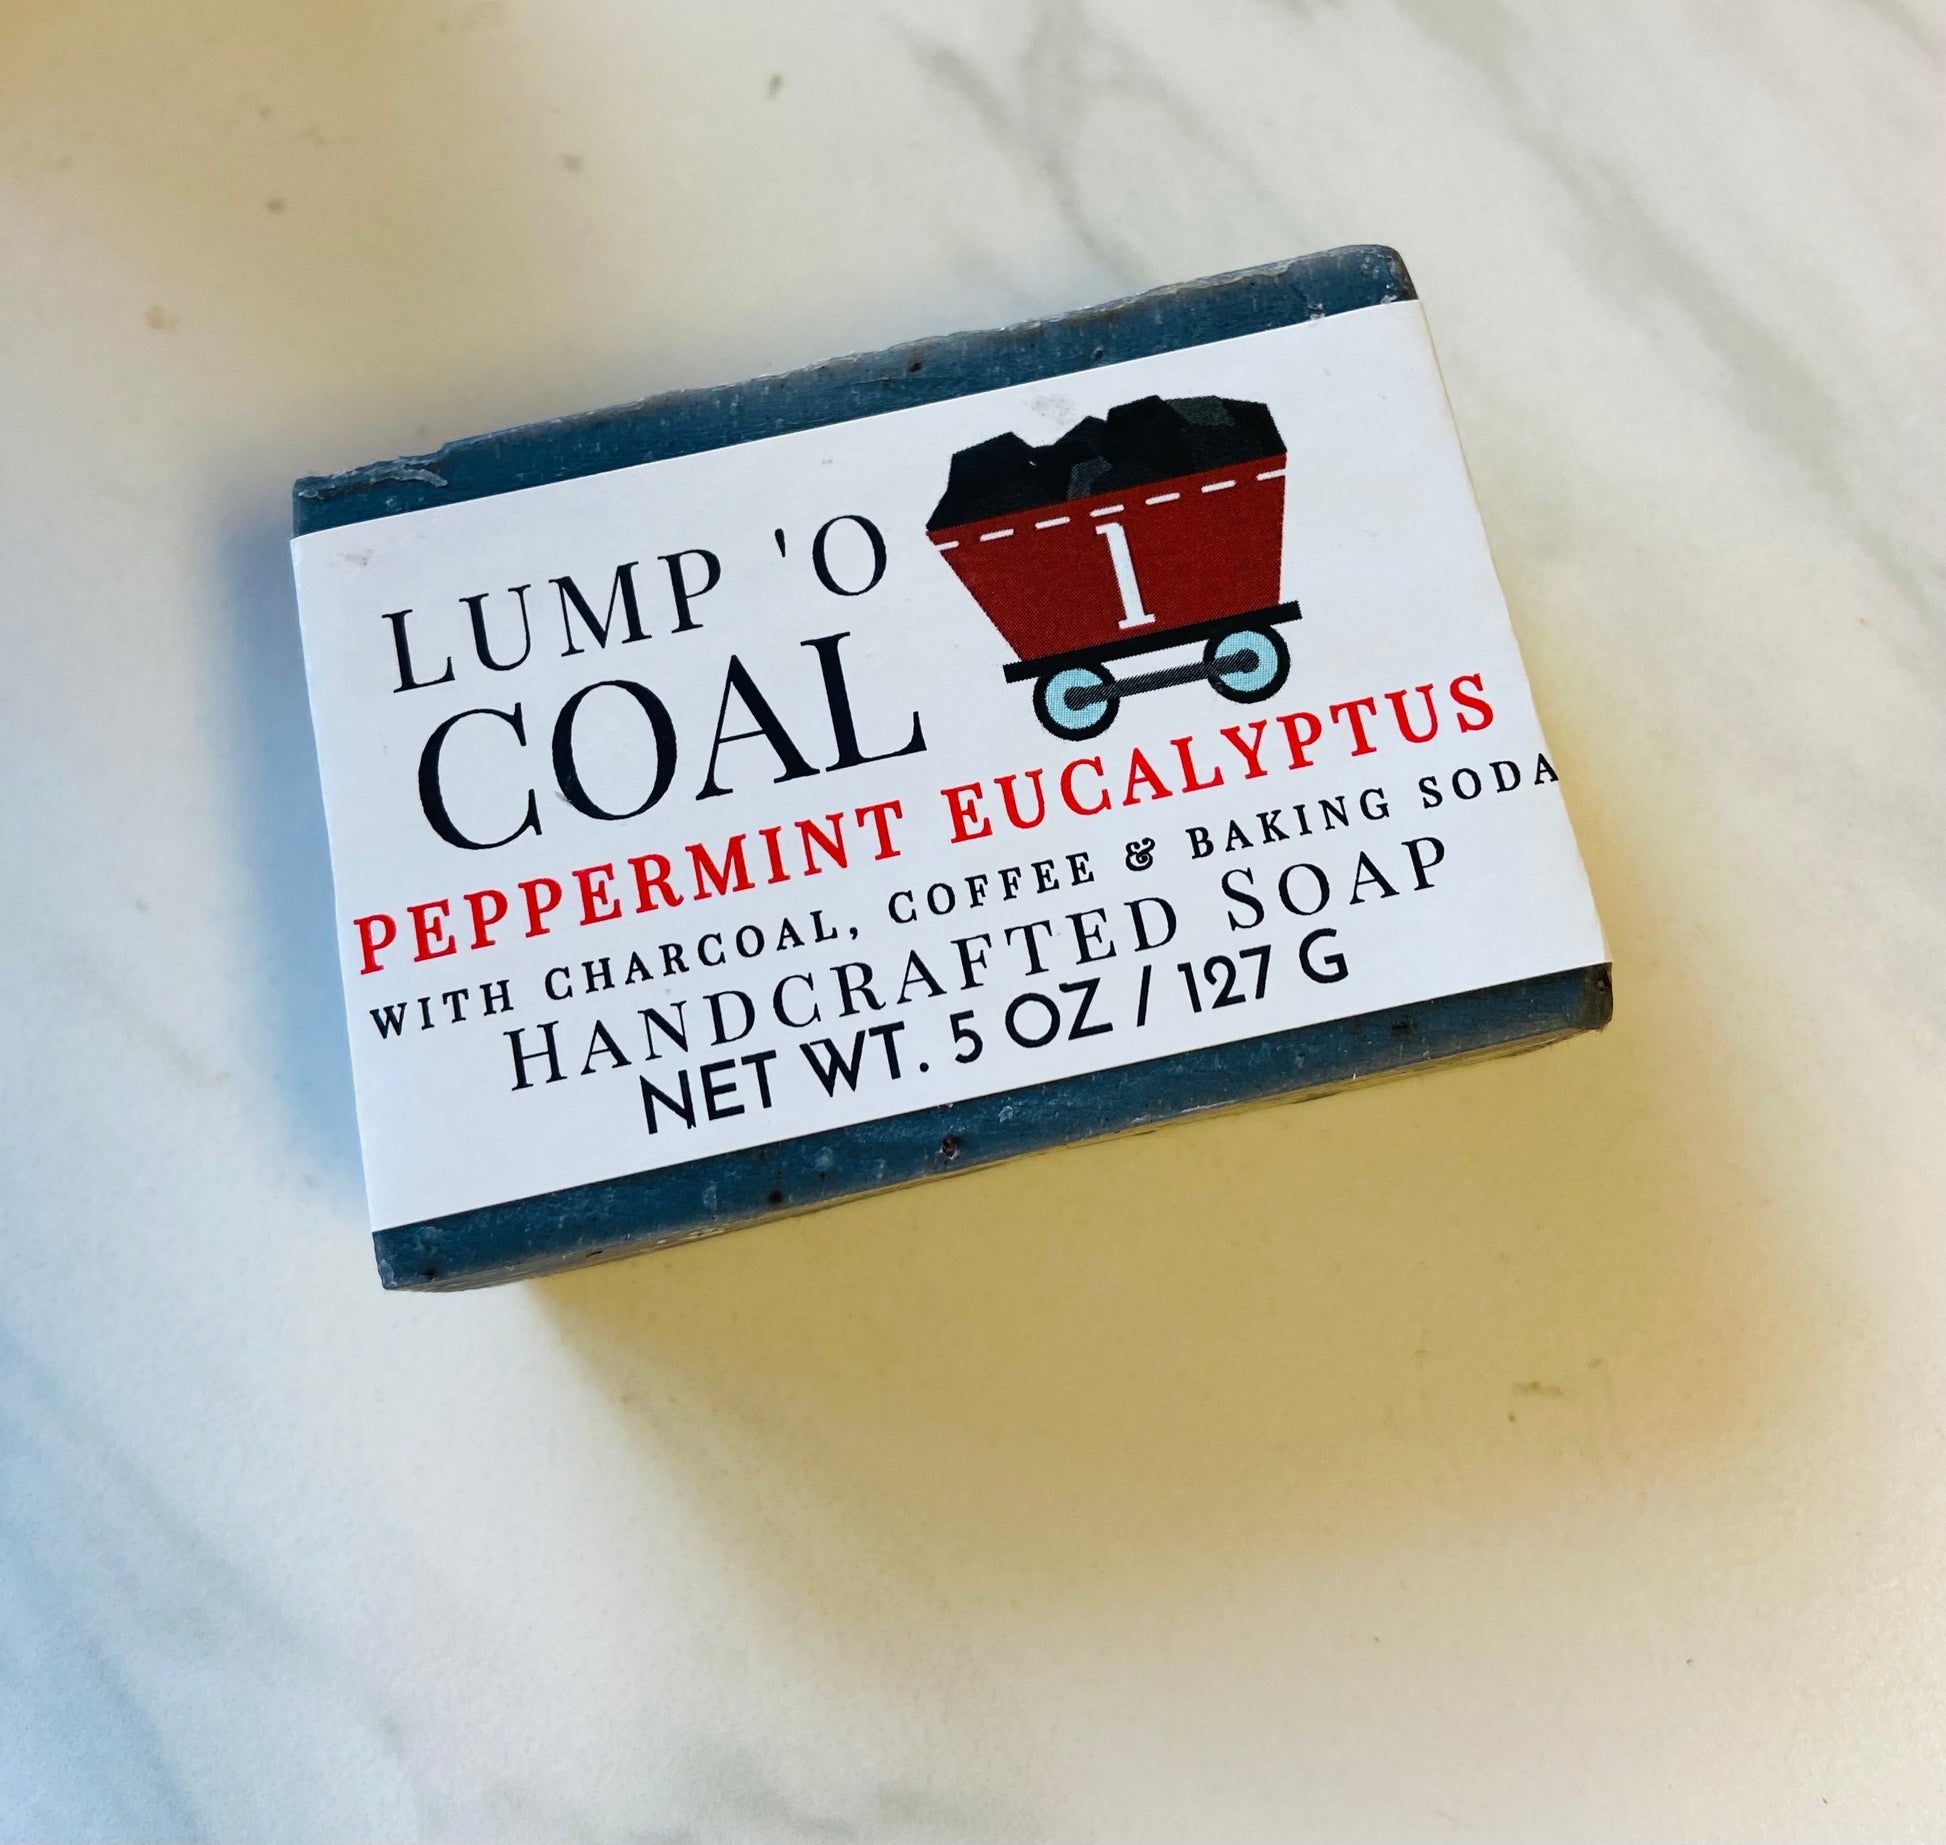 Lump Oâ€™ Coal Charcoal Handcrafted Soap - Pluff Mud Mercantile